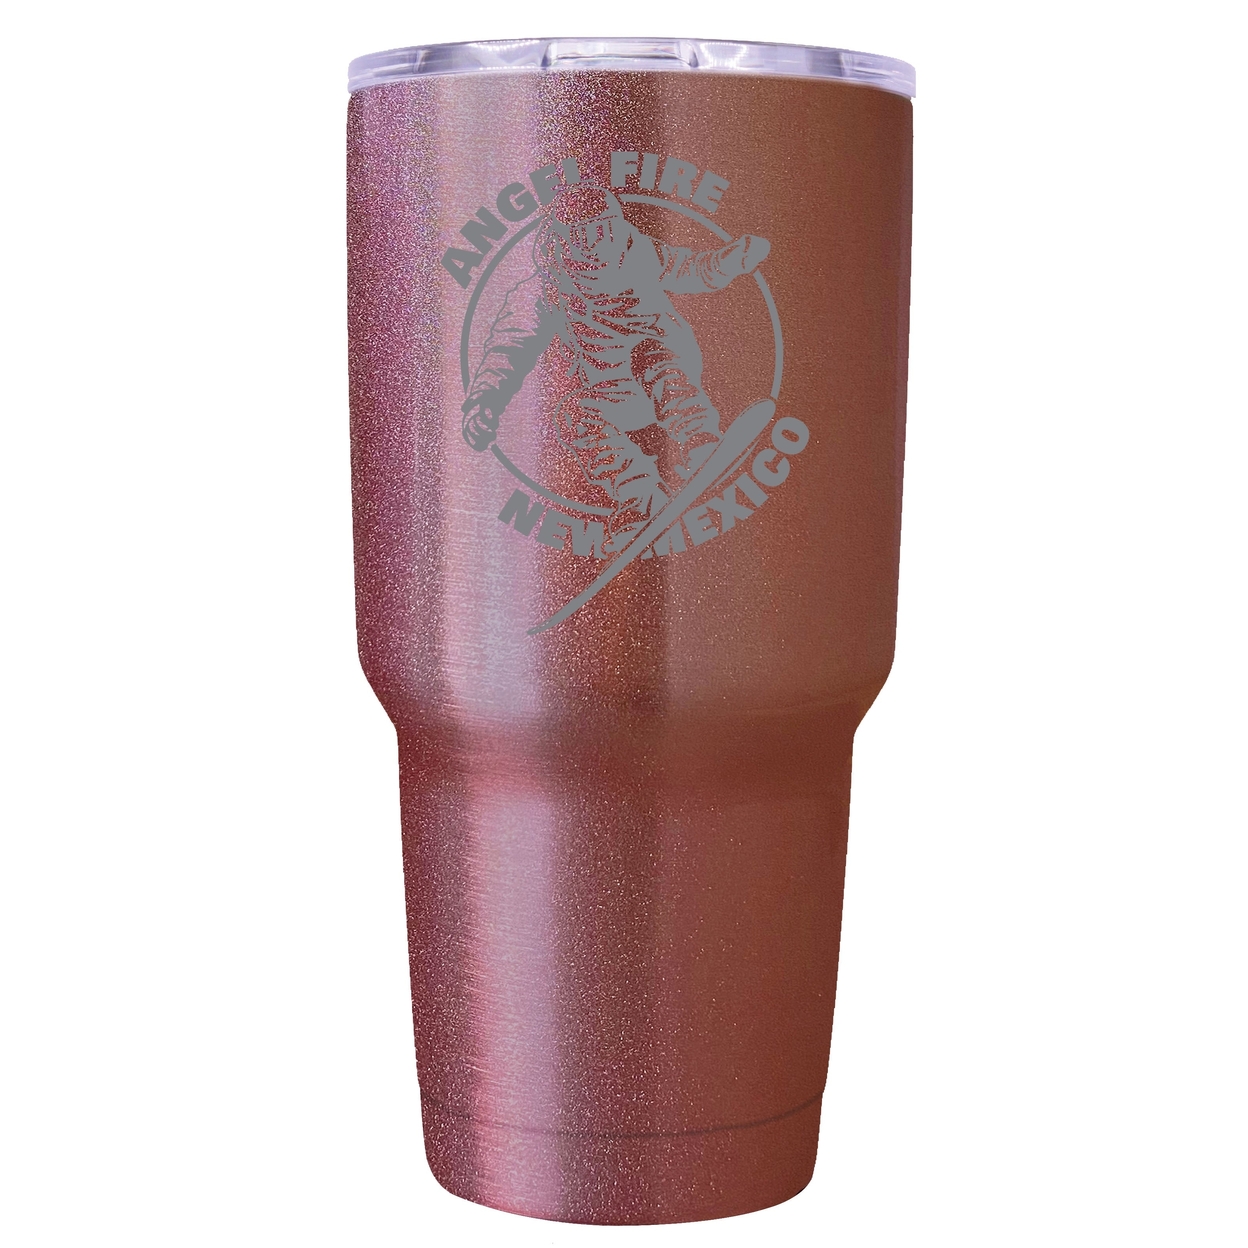 Angel Fire New Mexico Souvenir 24 Oz Engraved Insulated Stainless Steel Tumbler - Rose Gold,,2-Pack